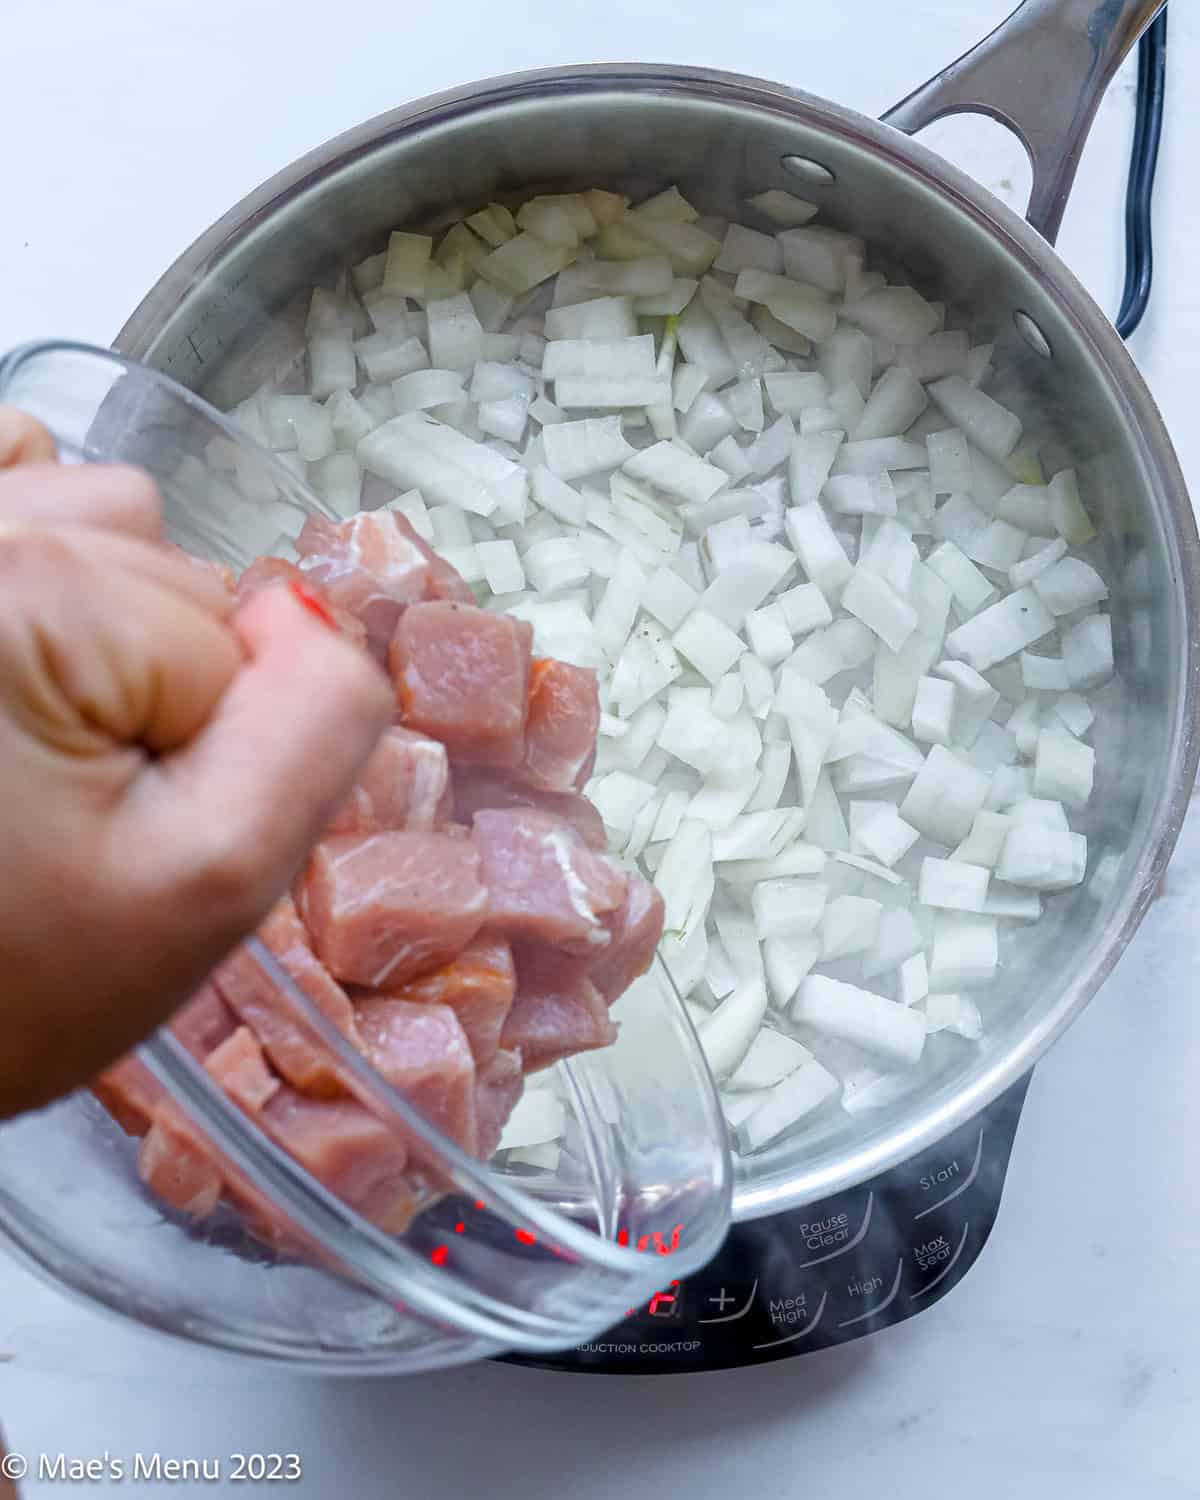 Adding the cubed pork to the sauteing onions.